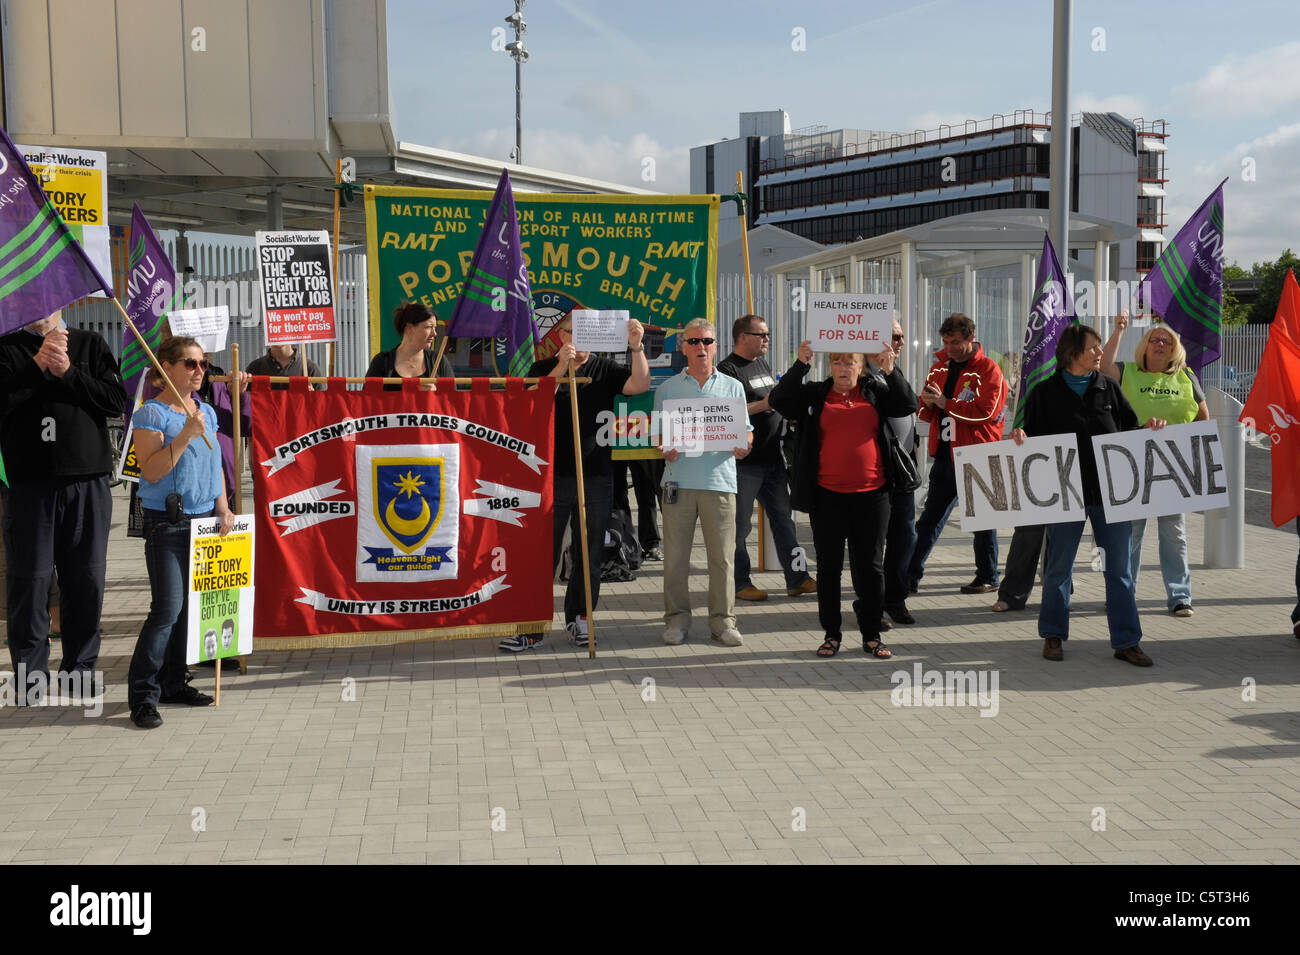 Trade Union protesters demonstrating against job cuts - Portsmouth, England Stock Photo